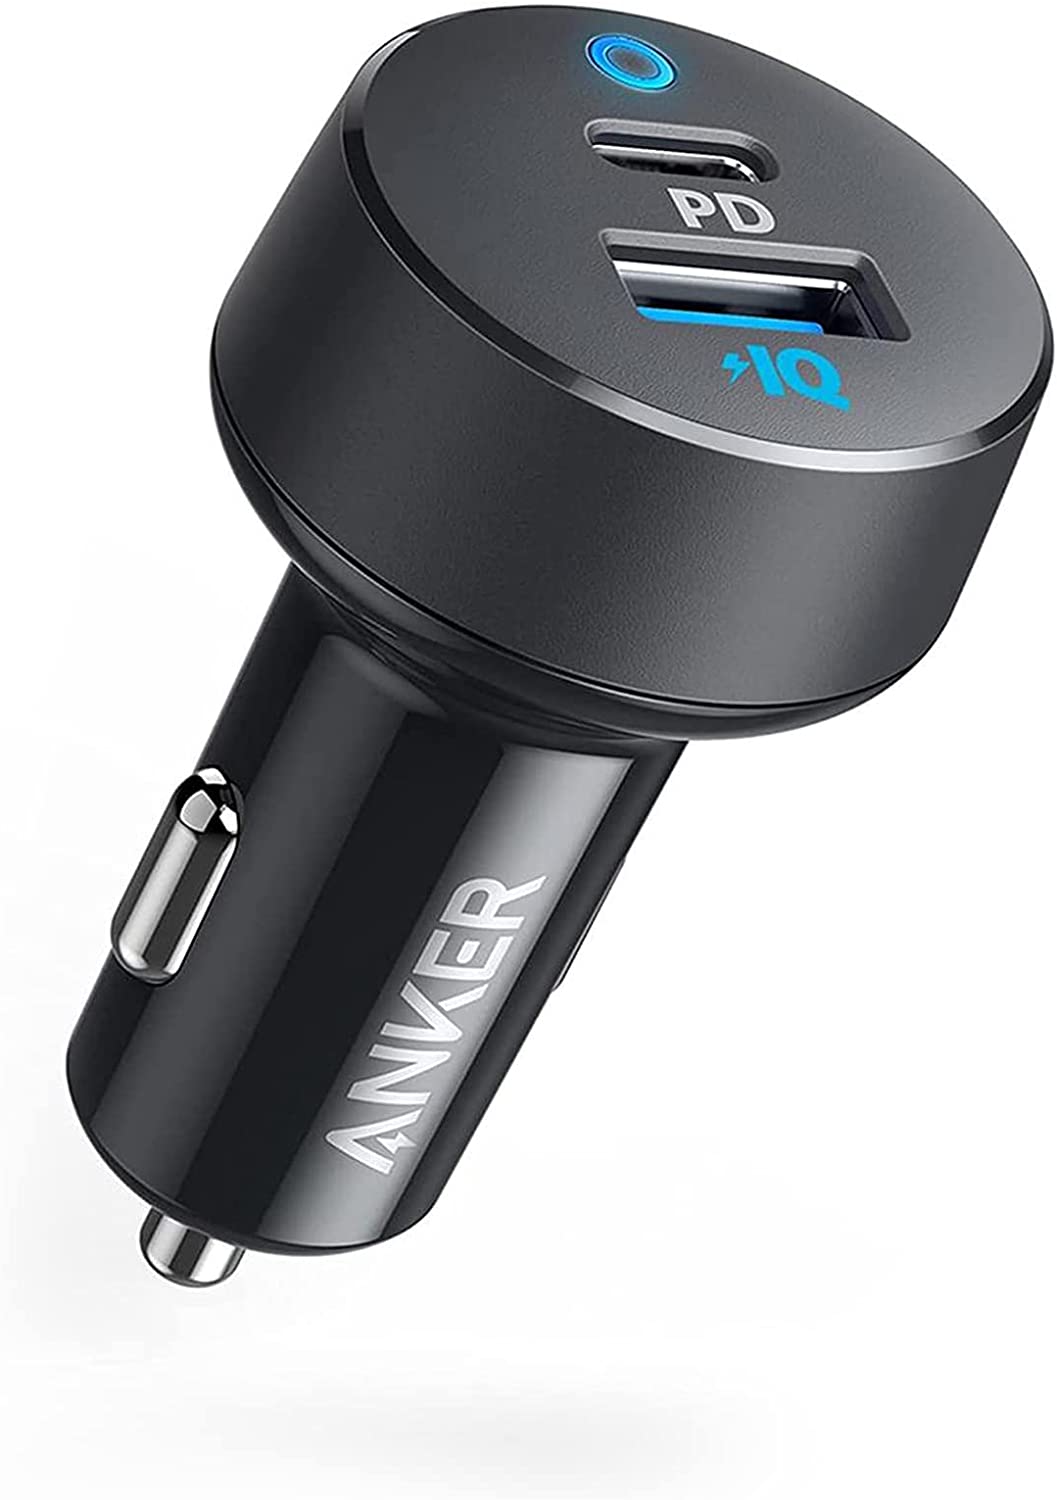 Anker Car Charger USB C, 32W 2-Port Compact Type C Car Charger with 20W Power Delivery and 12W PowerIQ, PowerDrive PD 2 with LED